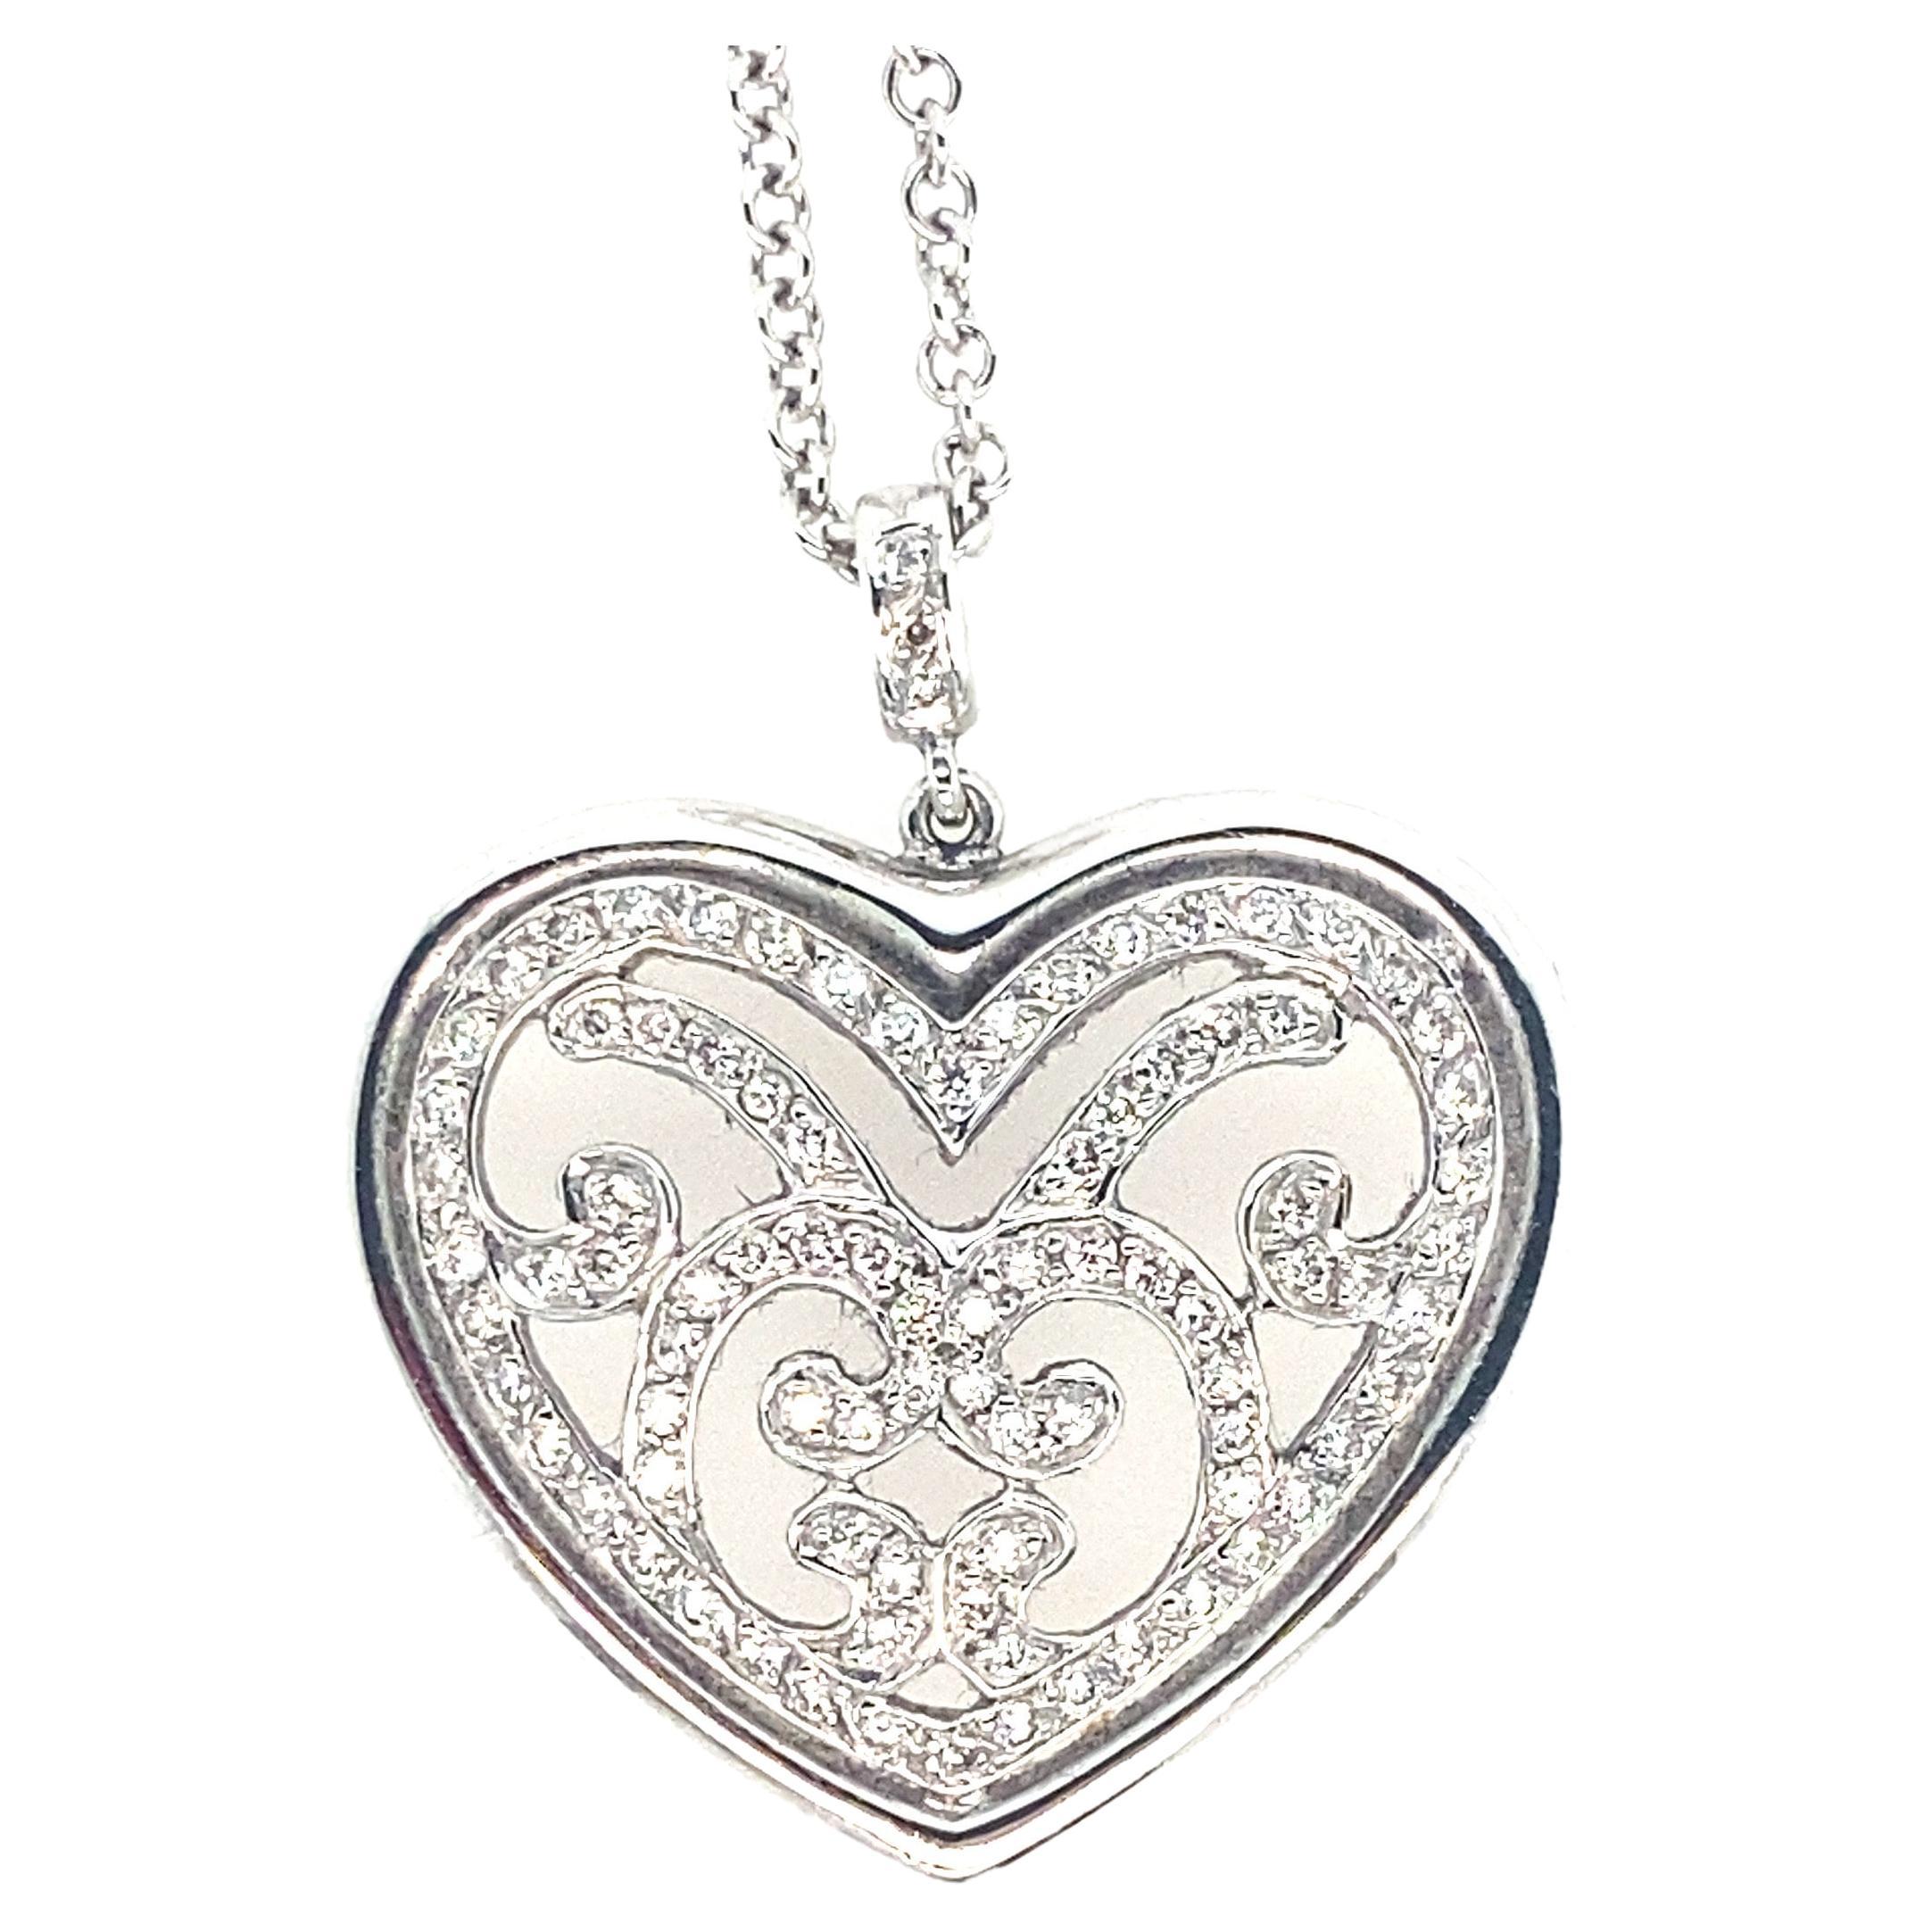 Spectacular 18 Karat Gold and Diamond Heart Pendant and Chain